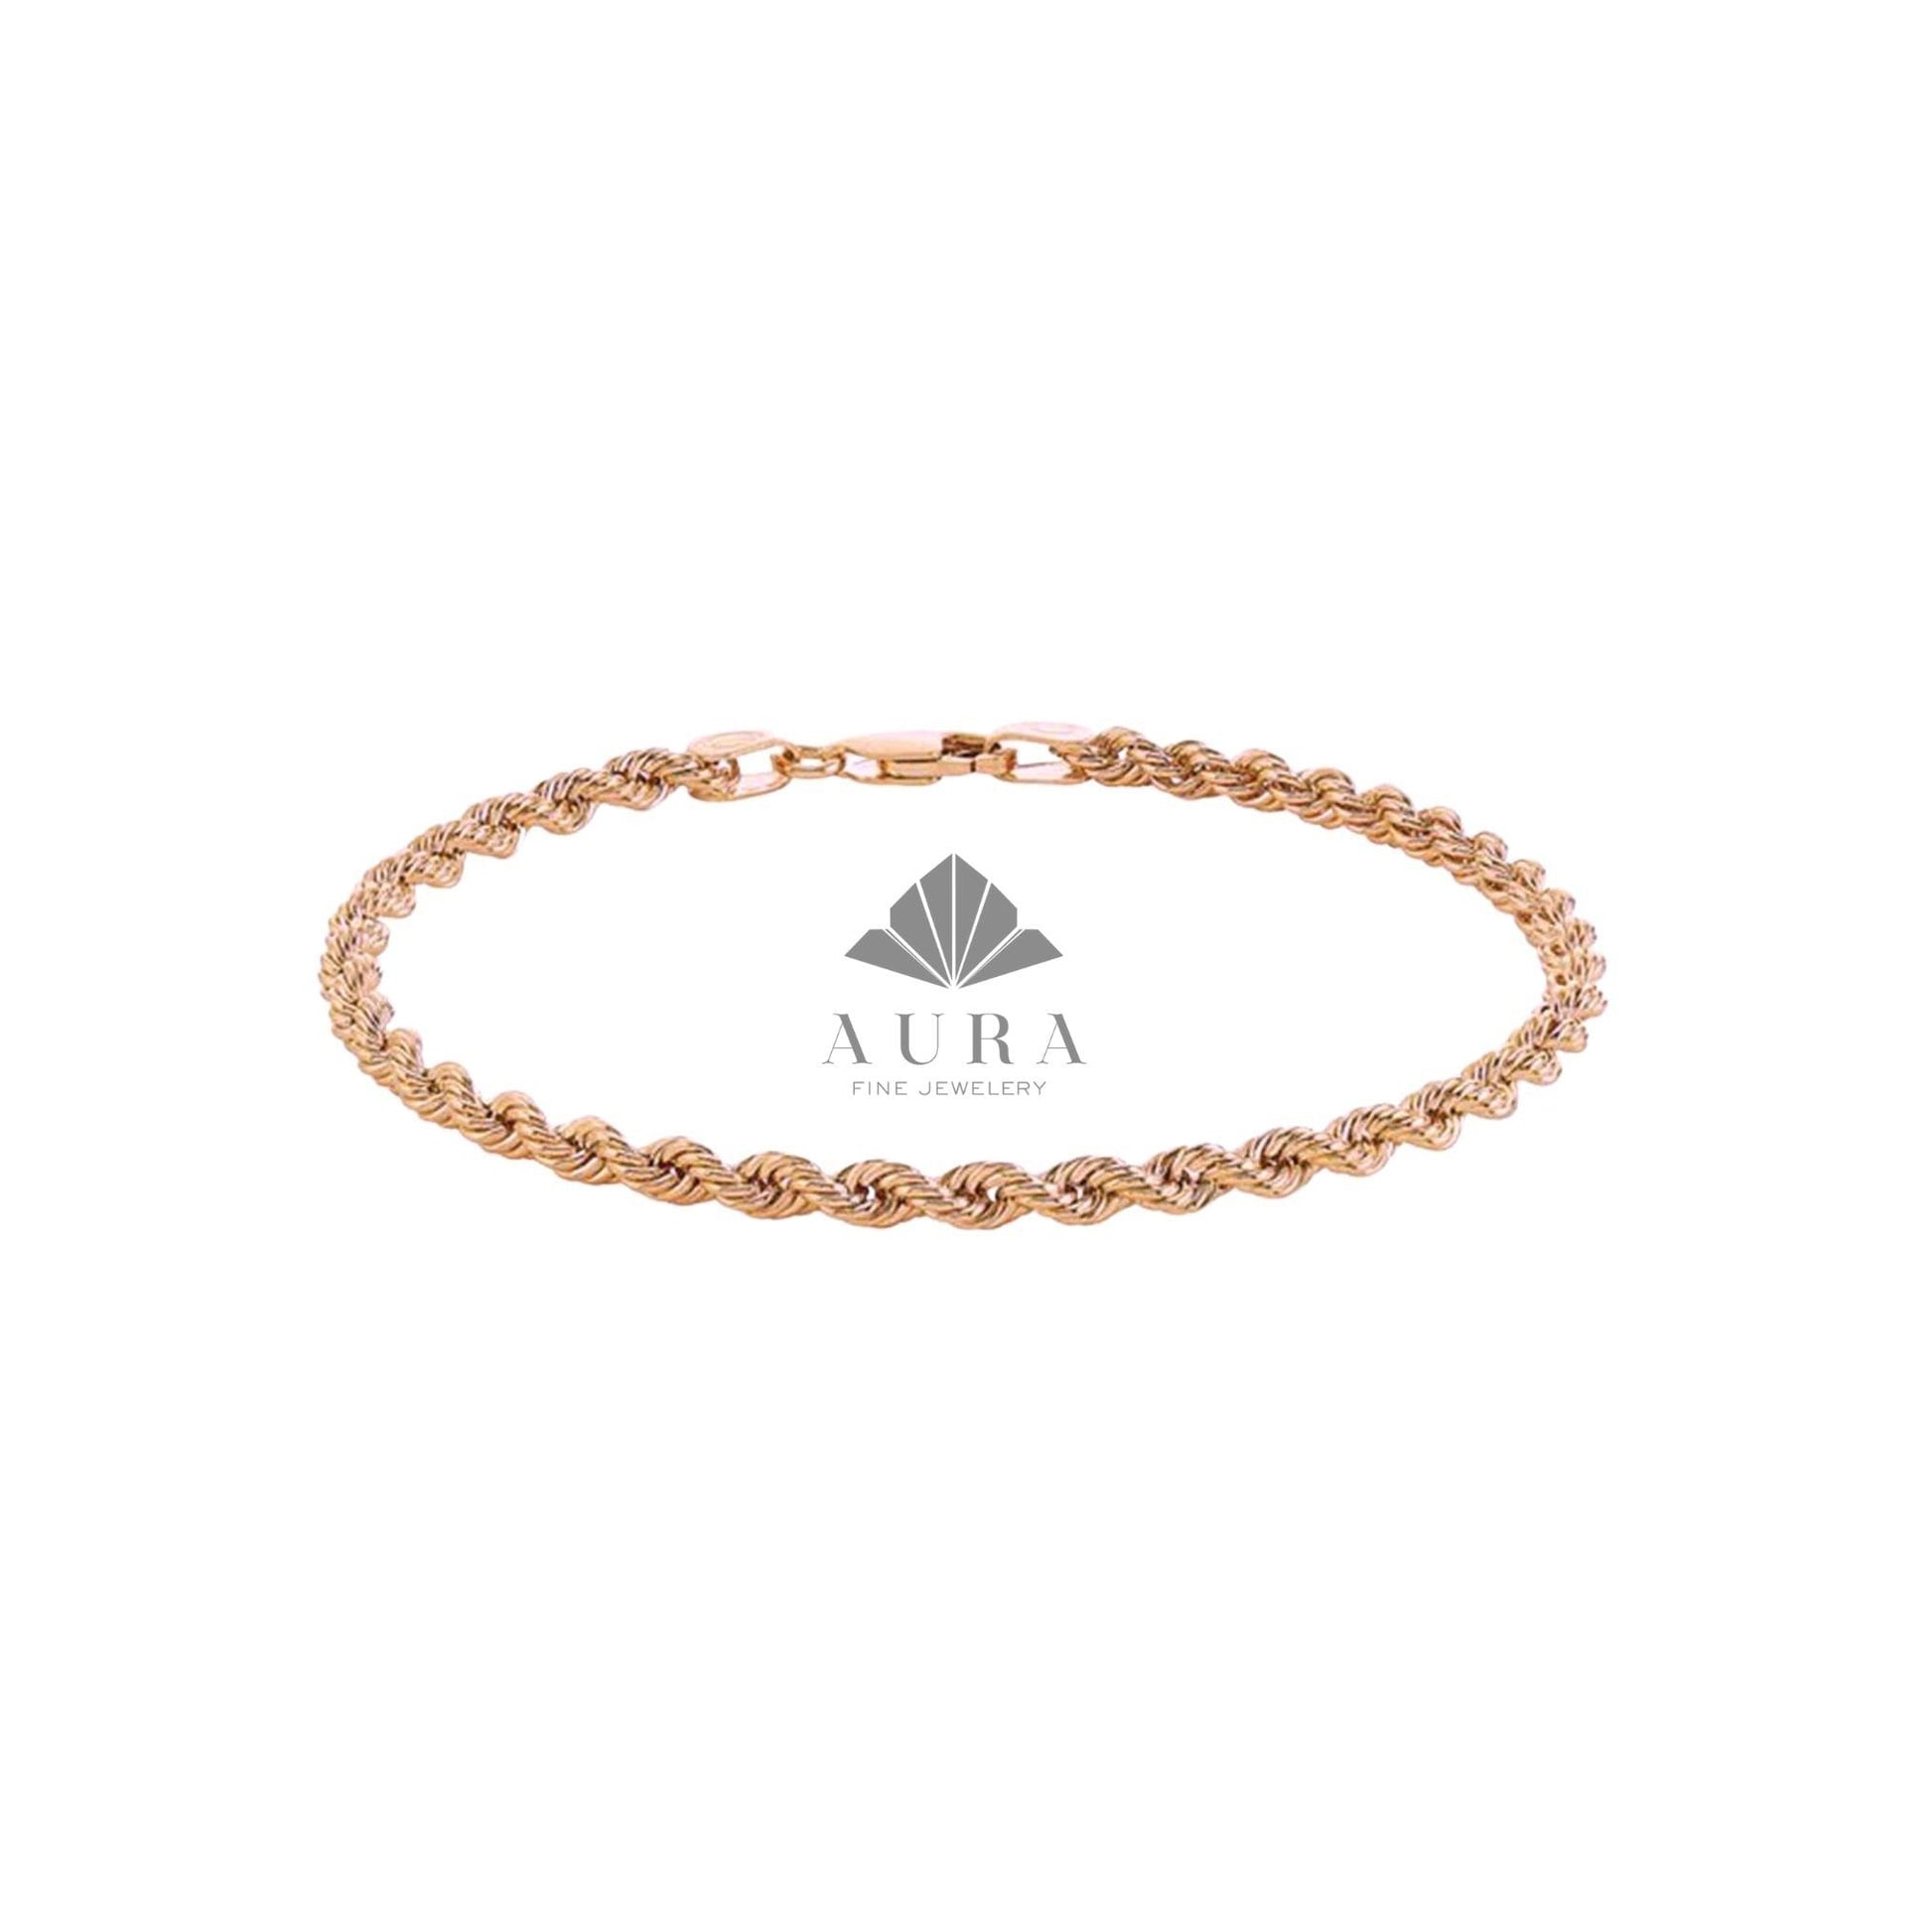 14K Gold Rope Chain Anklet, Twisted Chain Anklet, 2mm, 3mm, 4mm Rope Gold Chain, Bracelet Stack, Dainty Gold Chain, Men Women Chain